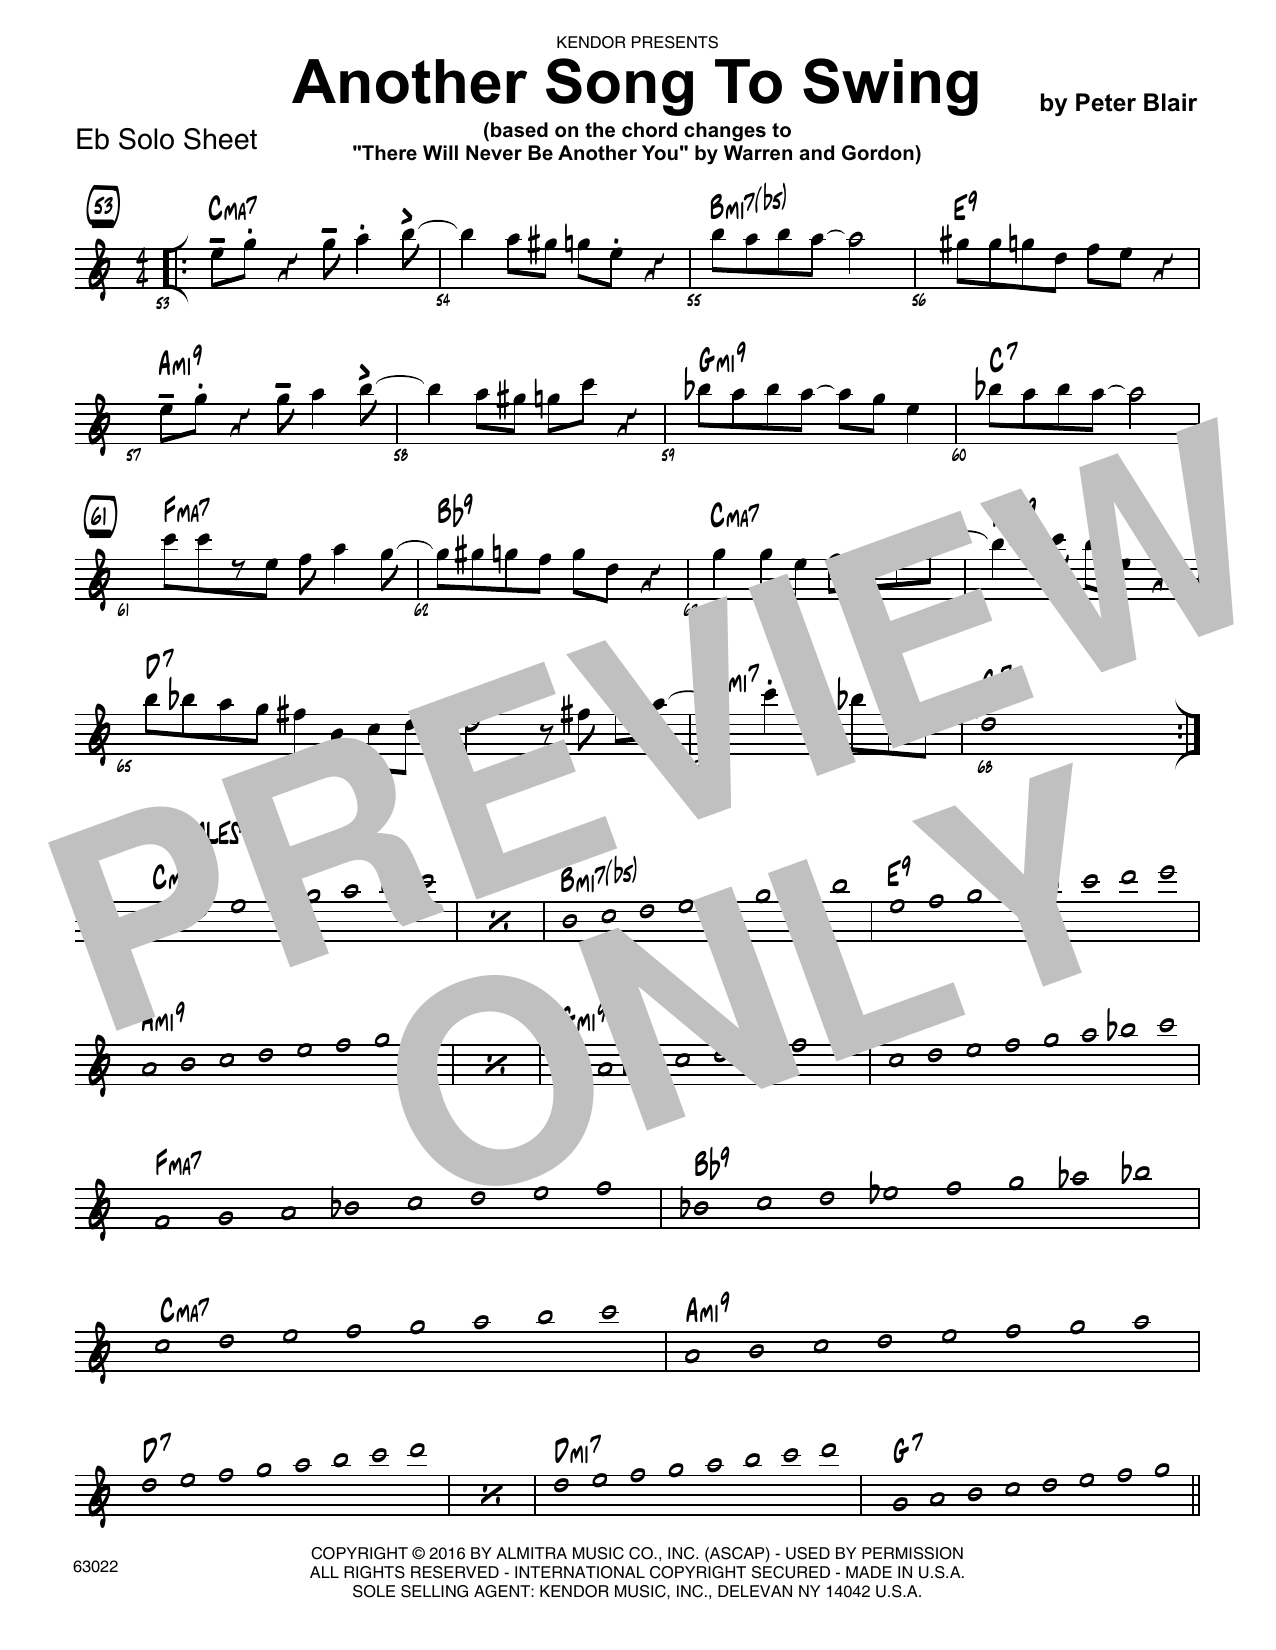 Download Peter Blair Another Song To Swing - Eb Solo Sheet Sheet Music